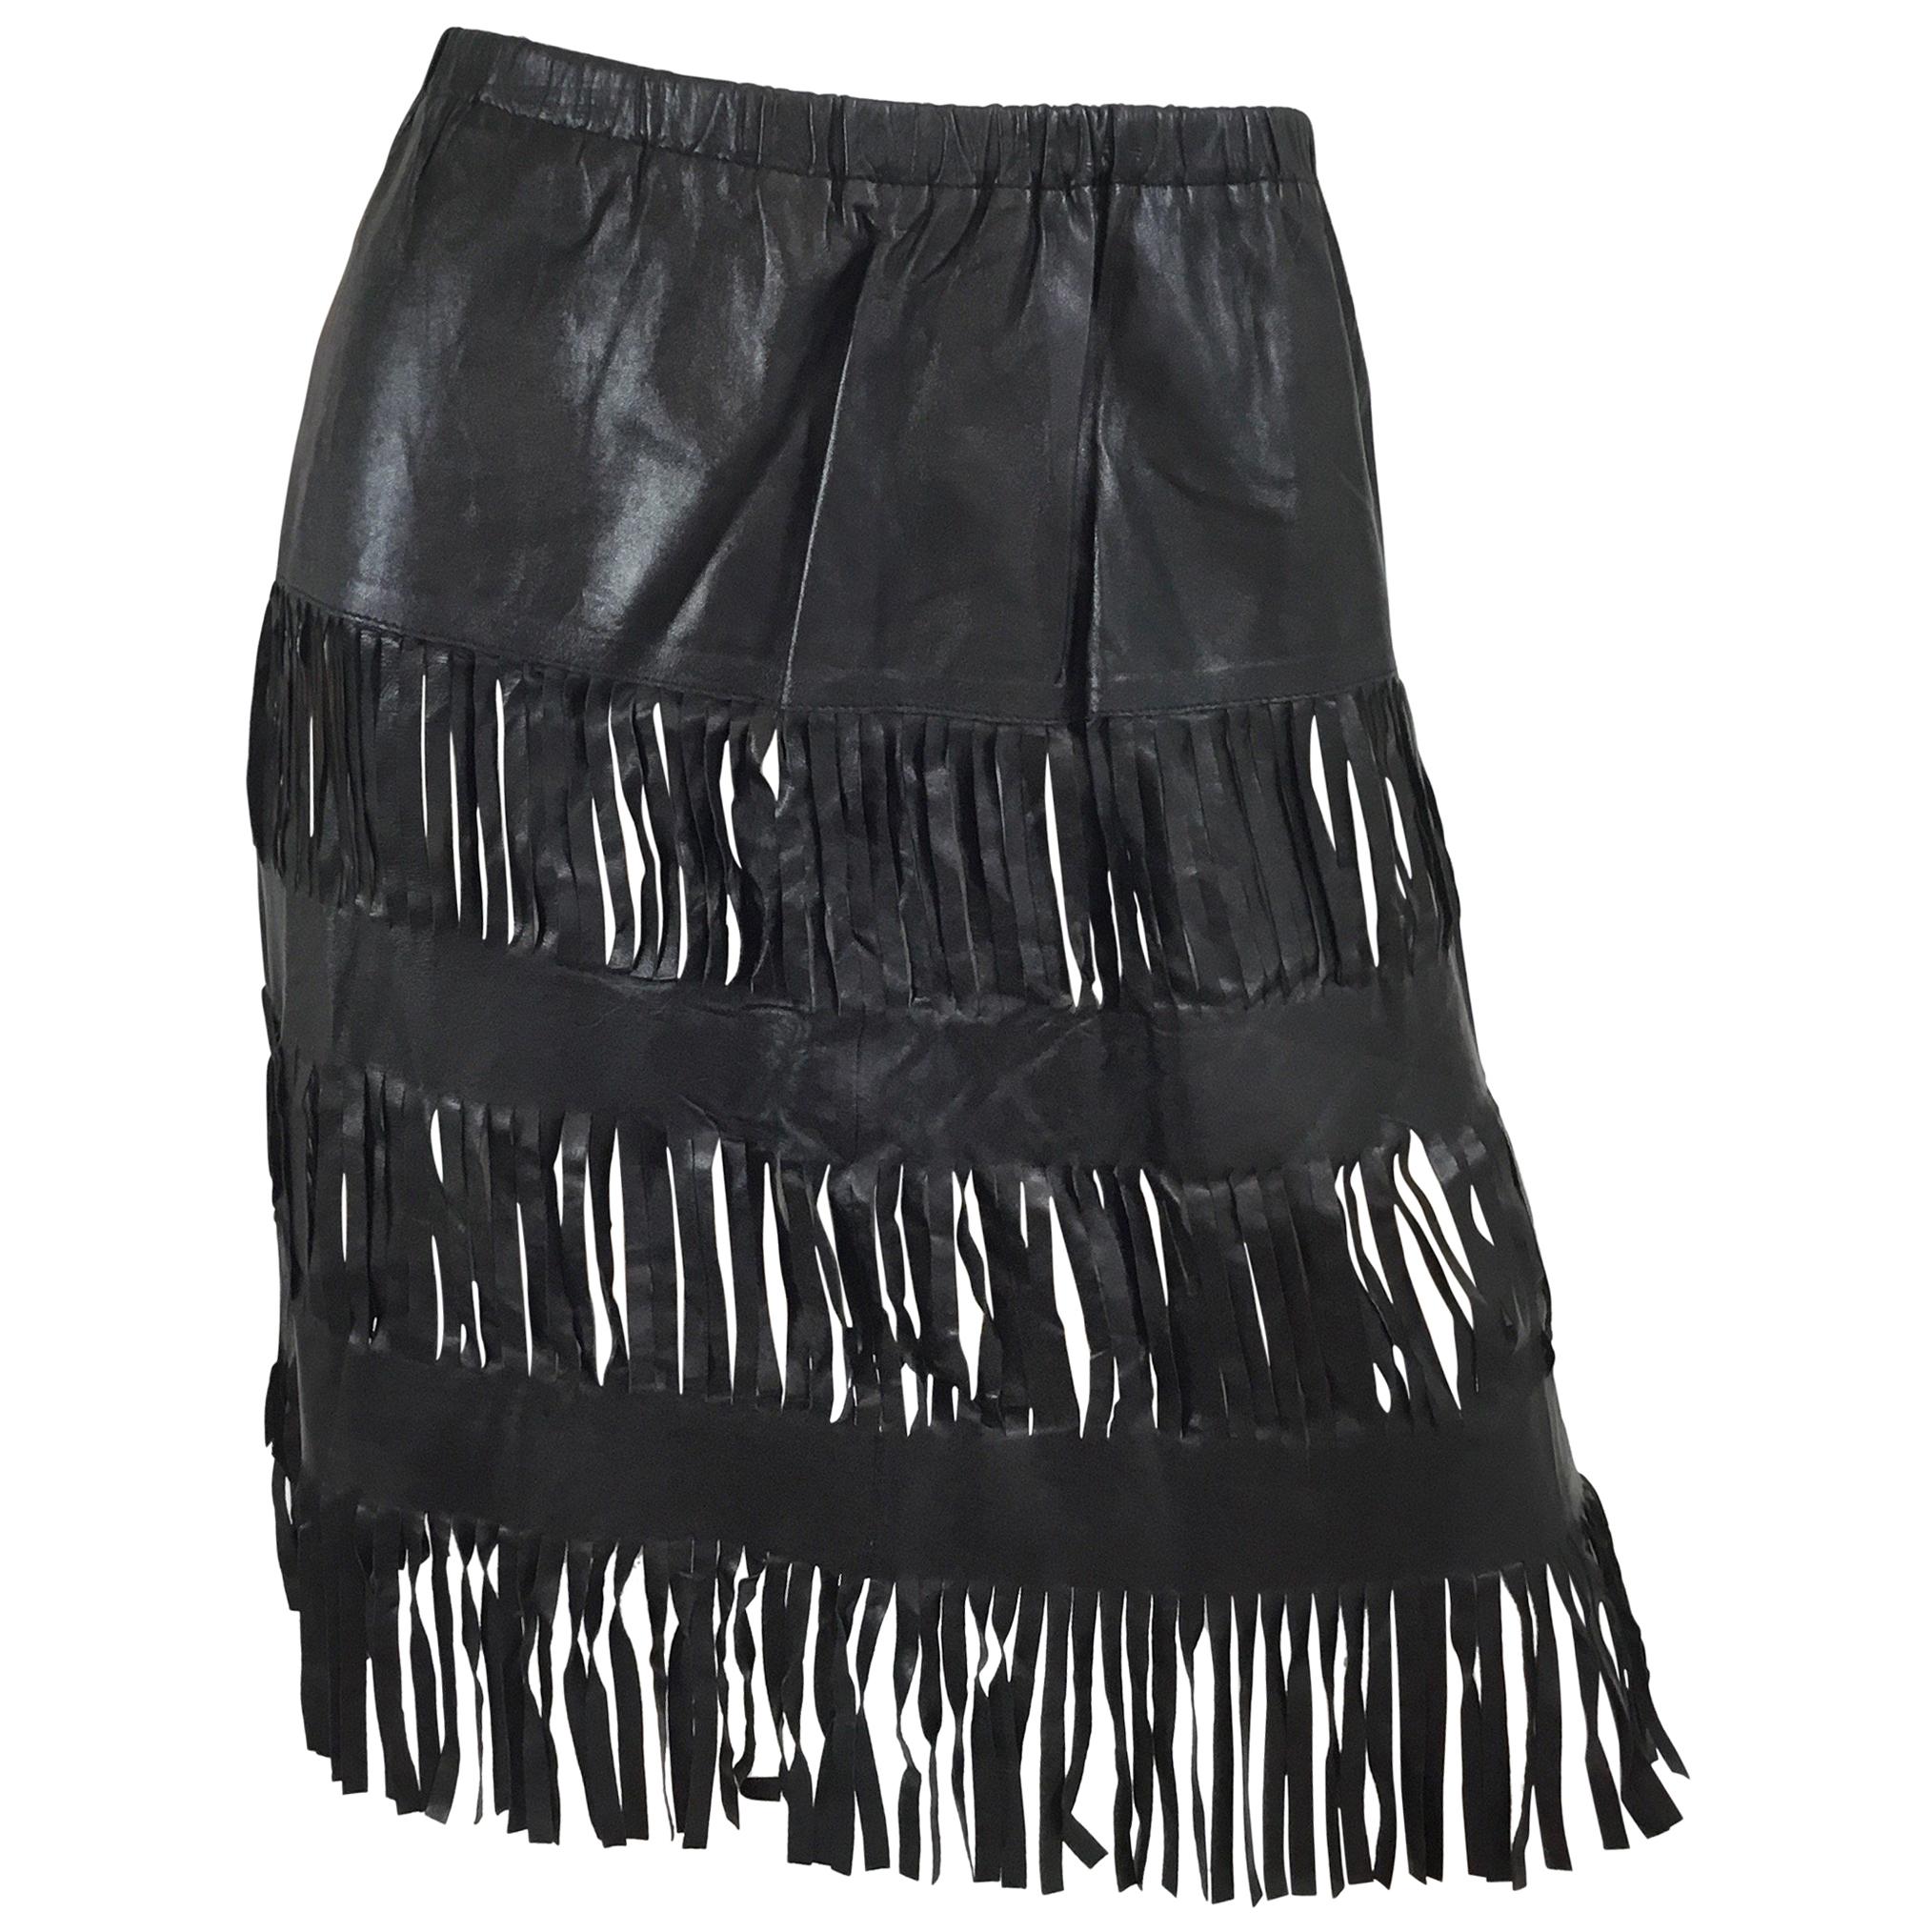 Tom Ford for Gucci Leather Fringe Skirt SS Runaway 1999